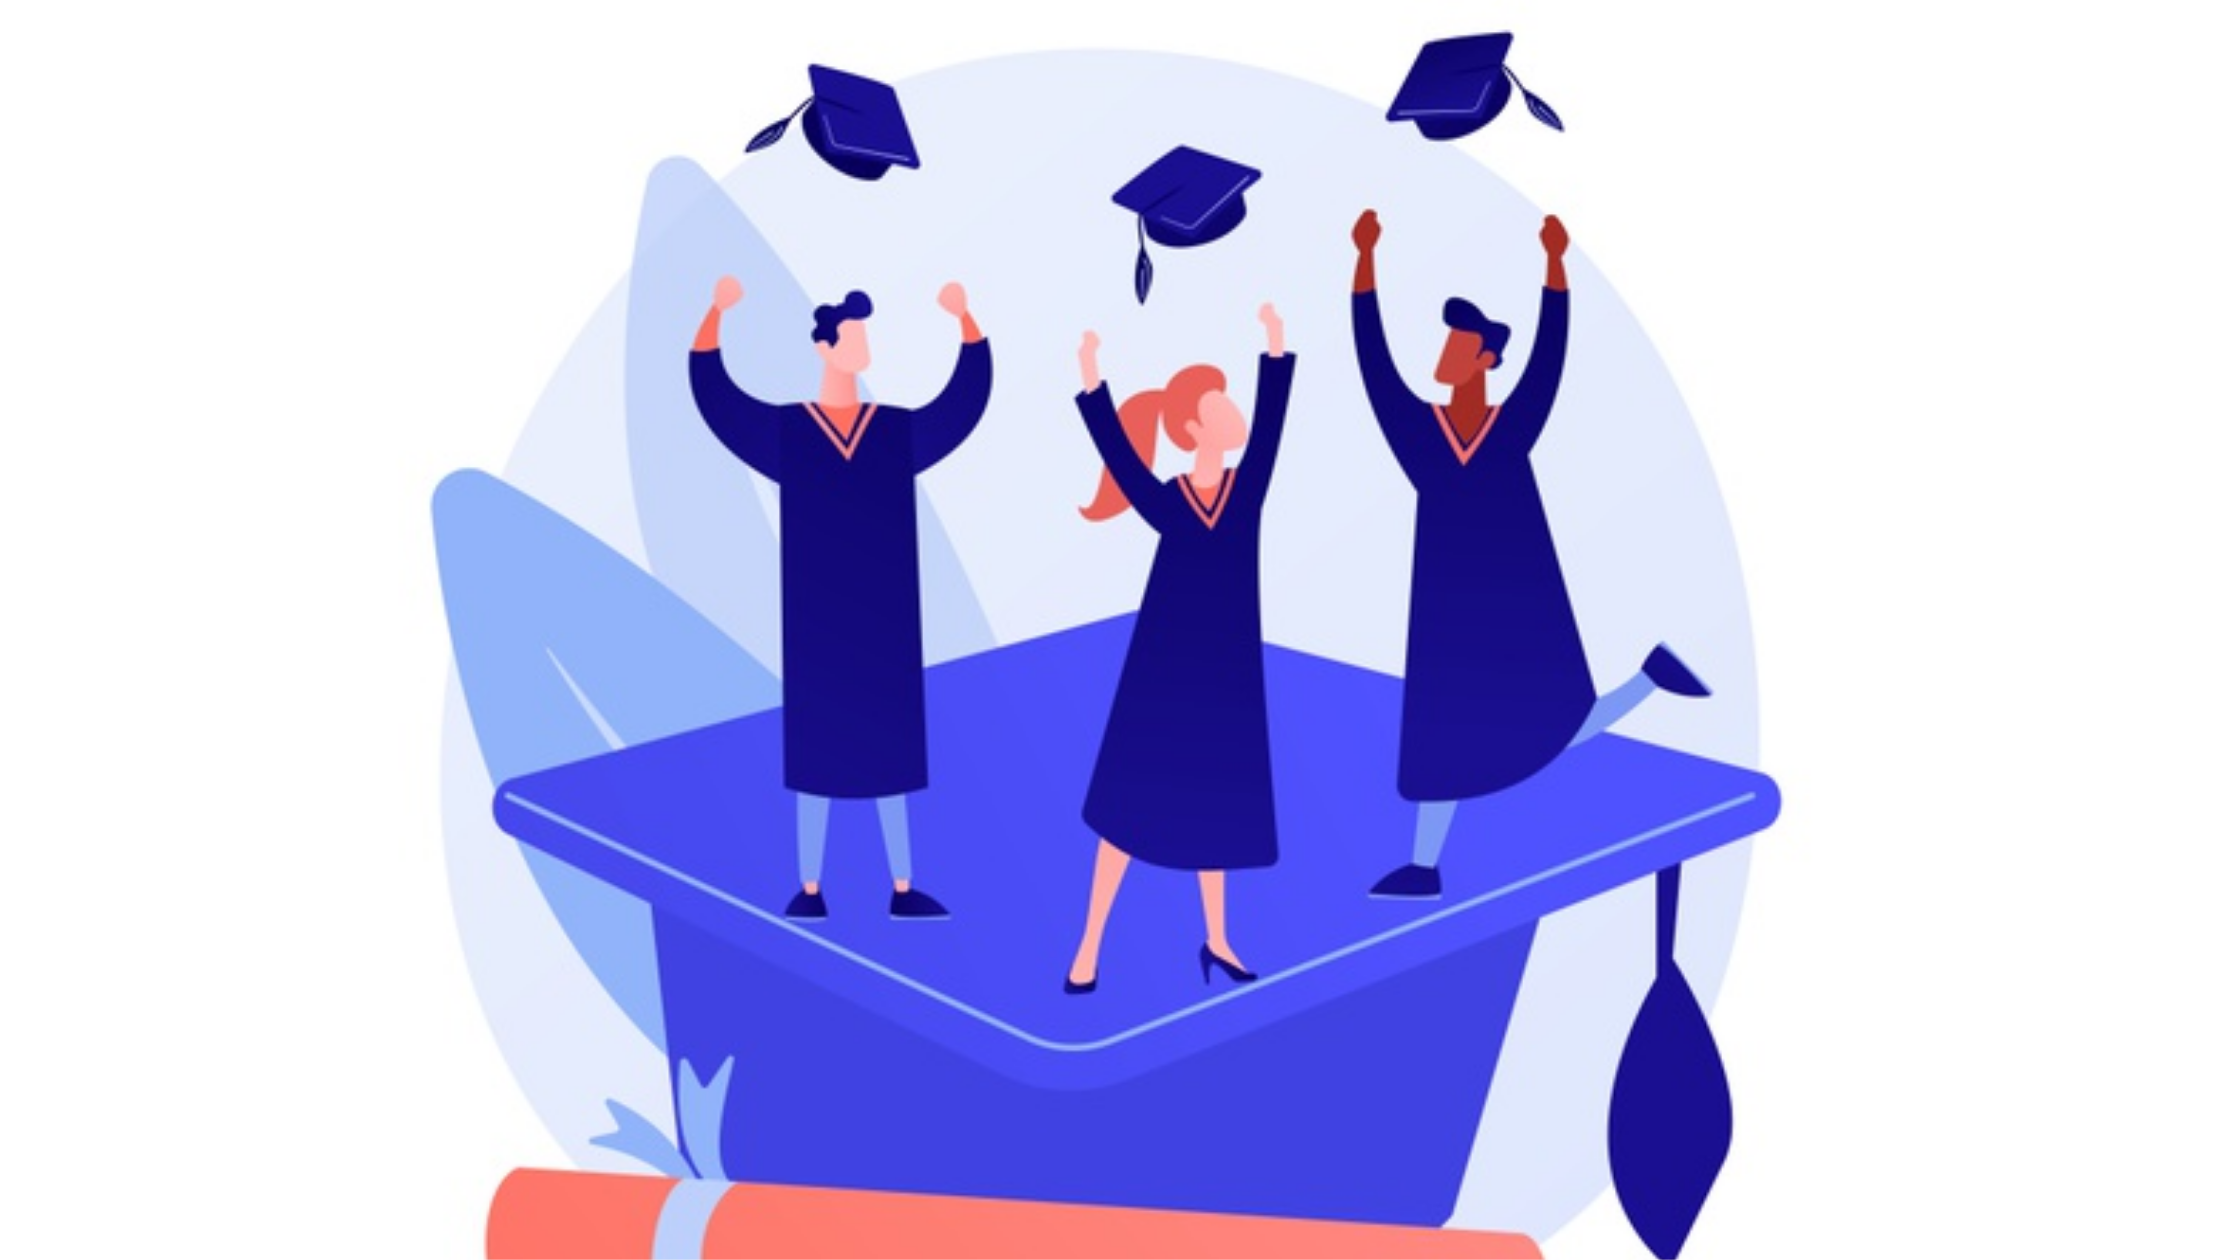 What after graduation in 2021- skills to build for a better future